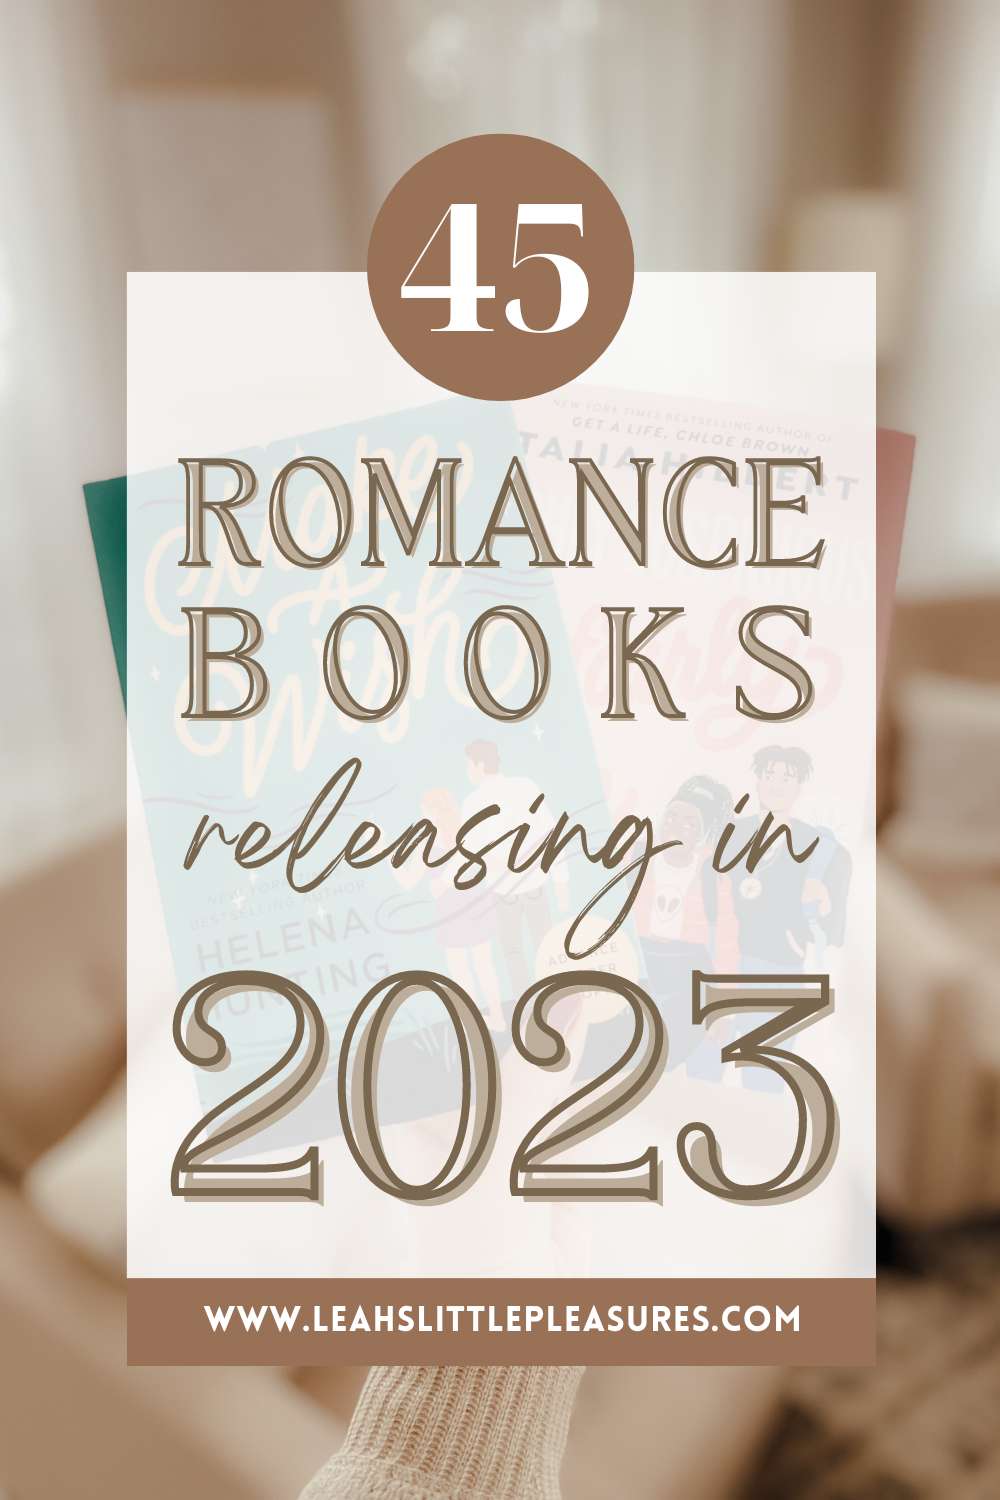 45 Romance Books Releasing in 2023.png